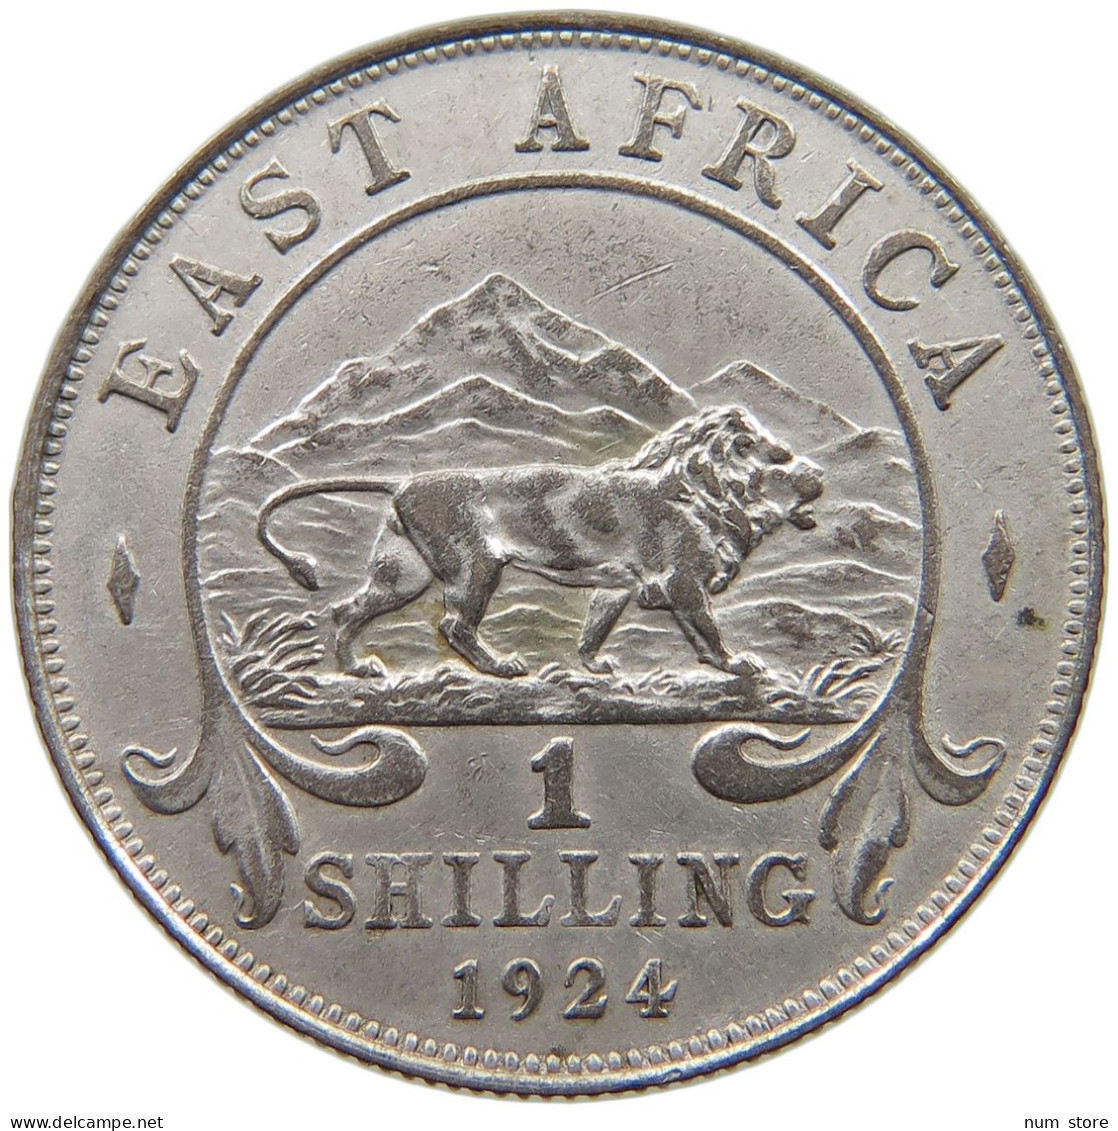 EAST AFRICA SHILLING 1924 GEORGE V. #MA 020905 - British Colony